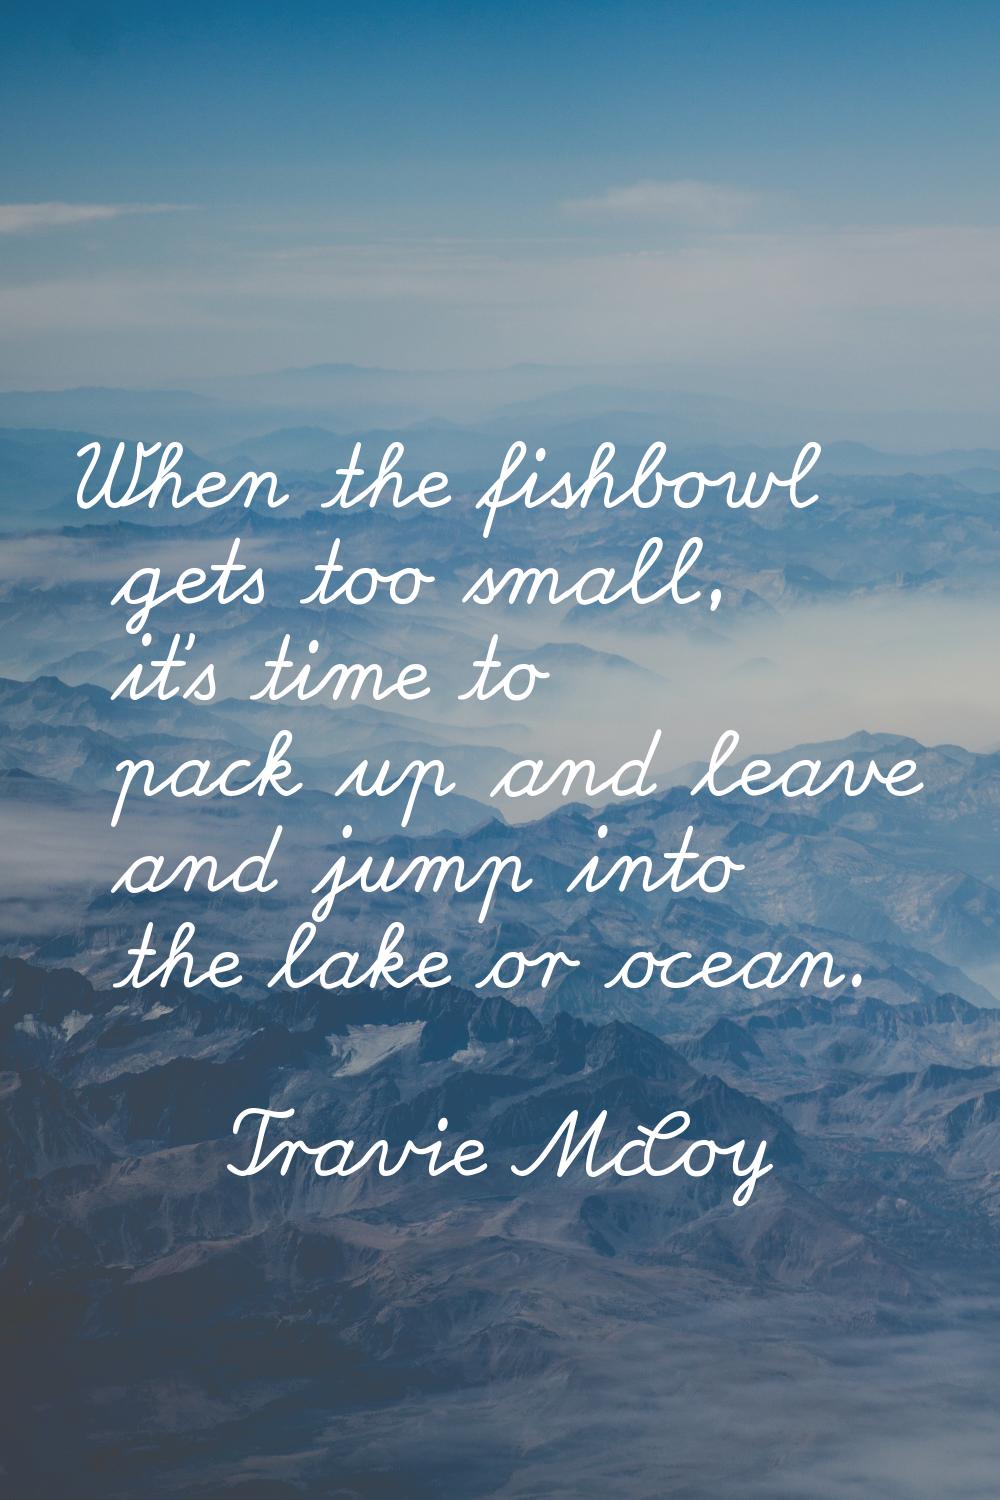 When the fishbowl gets too small, it's time to pack up and leave and jump into the lake or ocean.